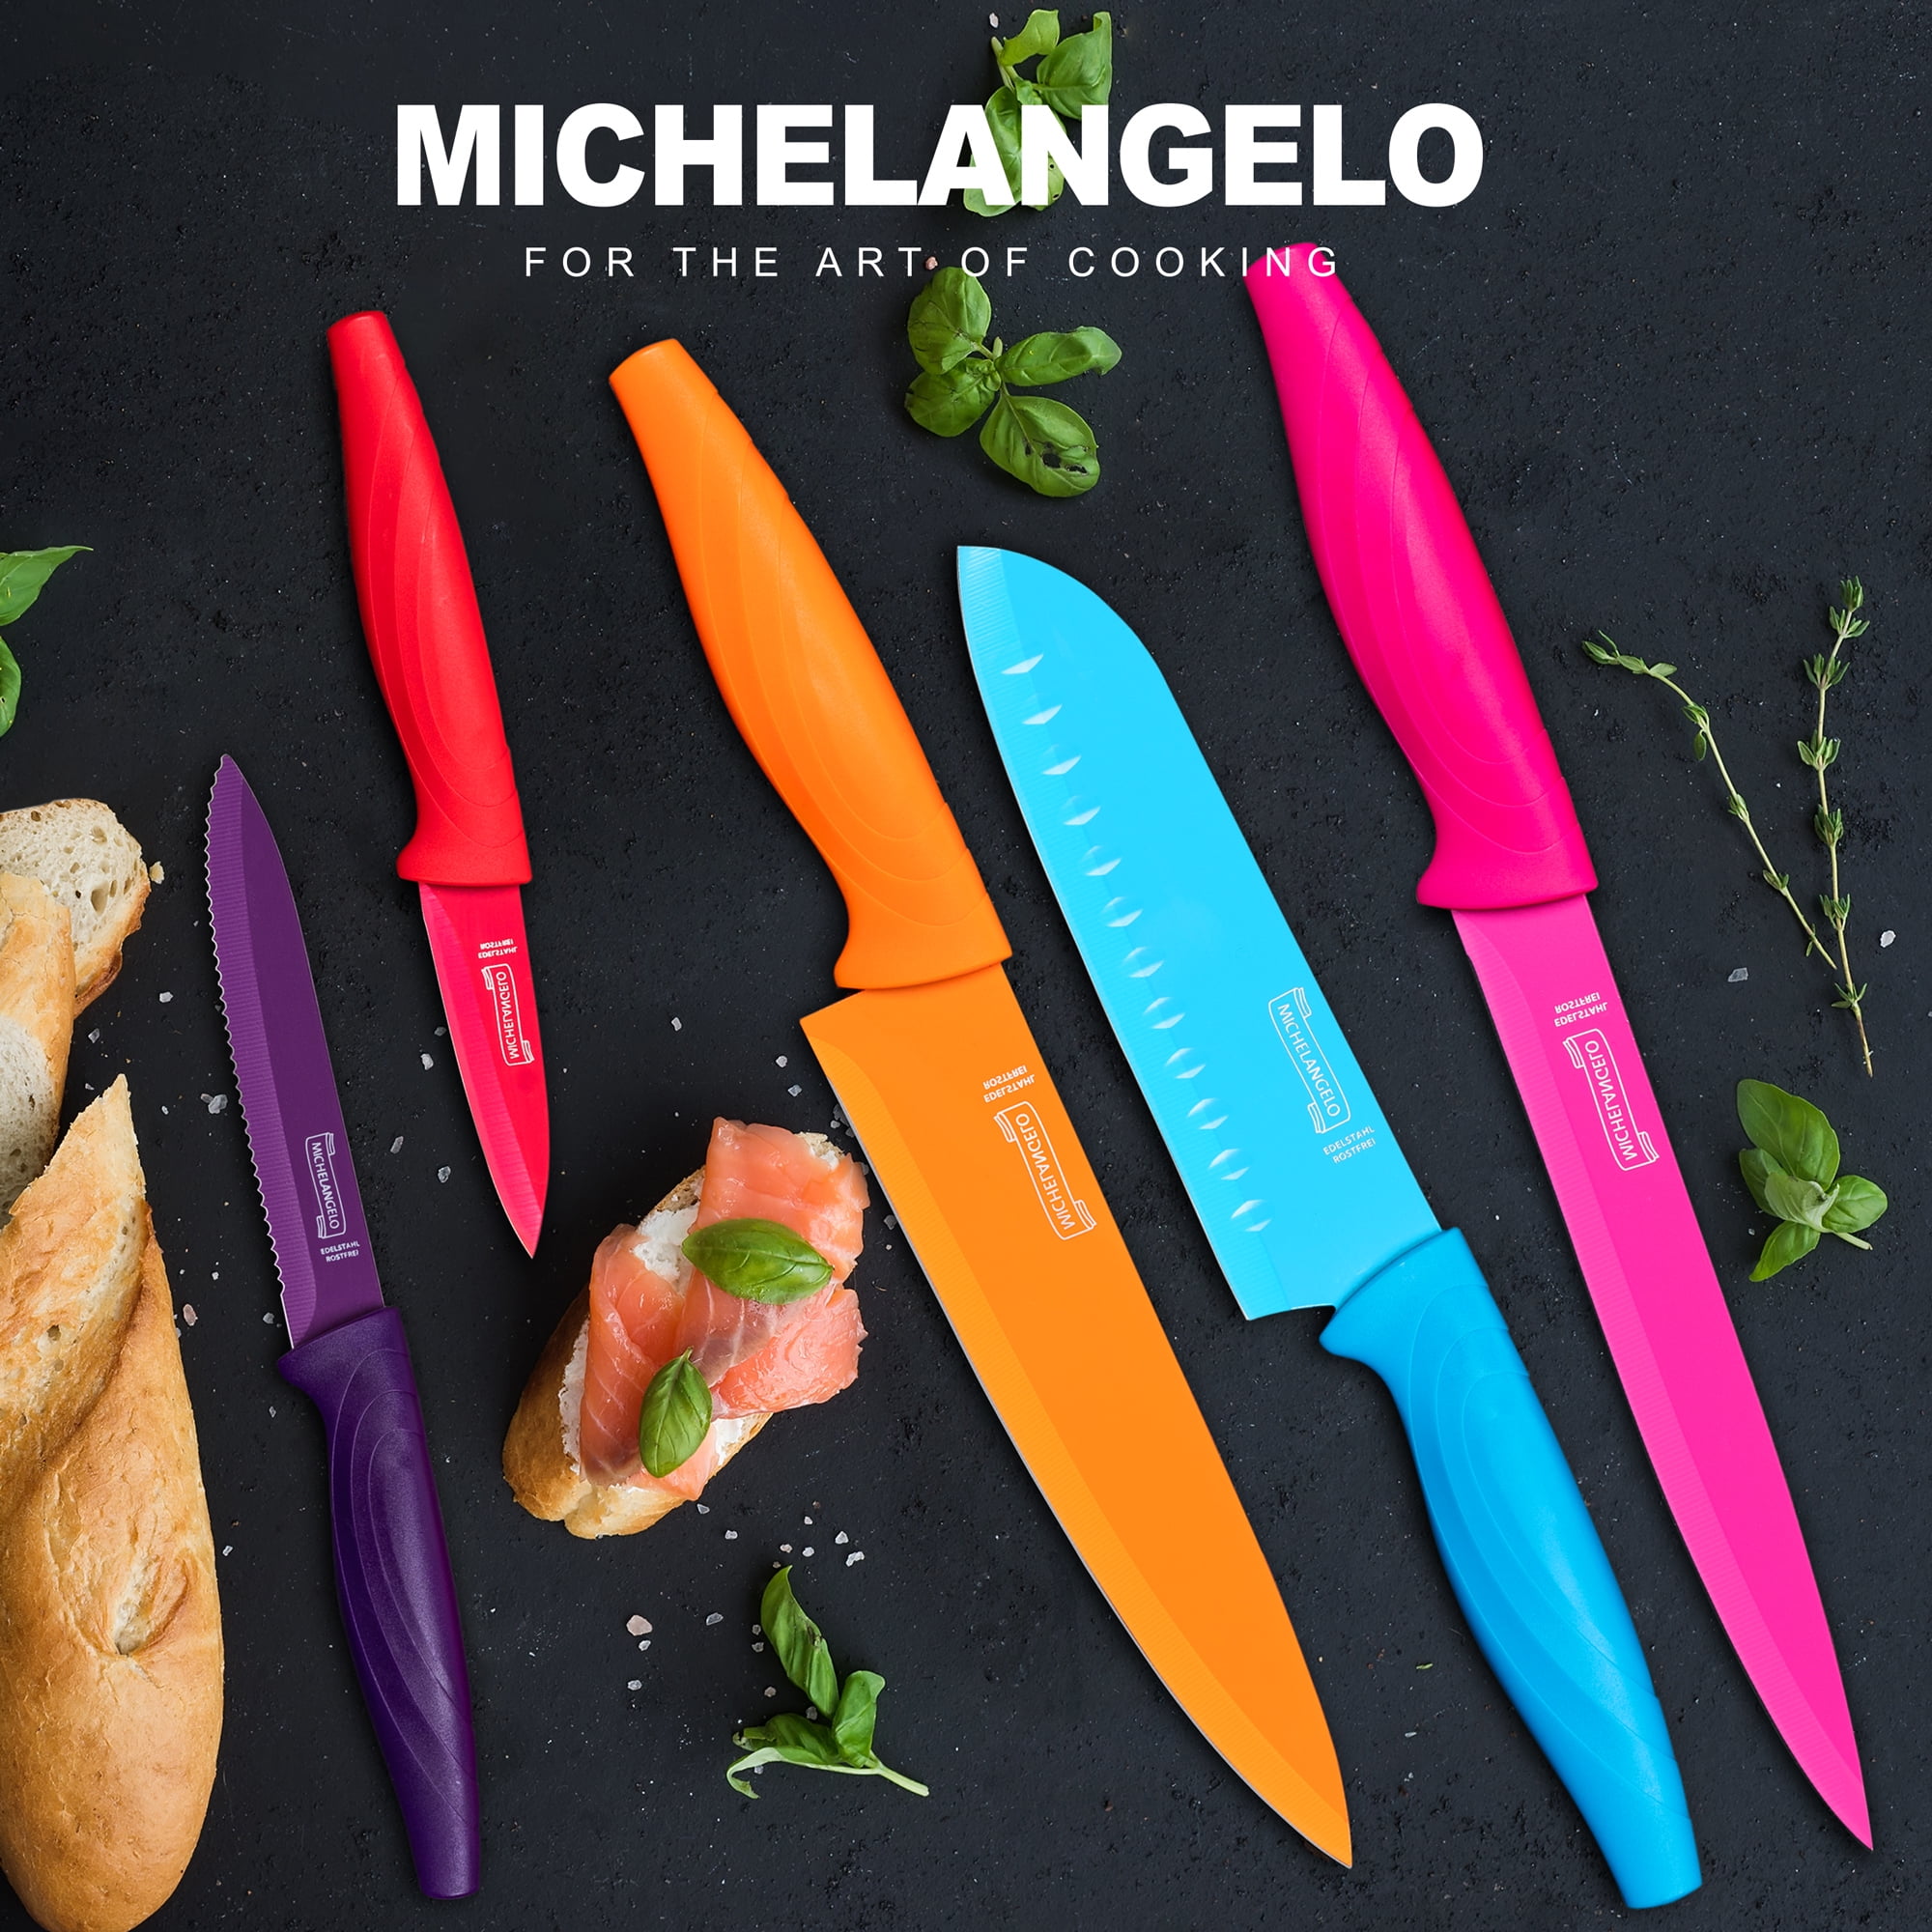 MICHELANGELO Kitchen Knife Set 5 Knives 5 Knife Sheath Covers Rainbow  Colors NEW